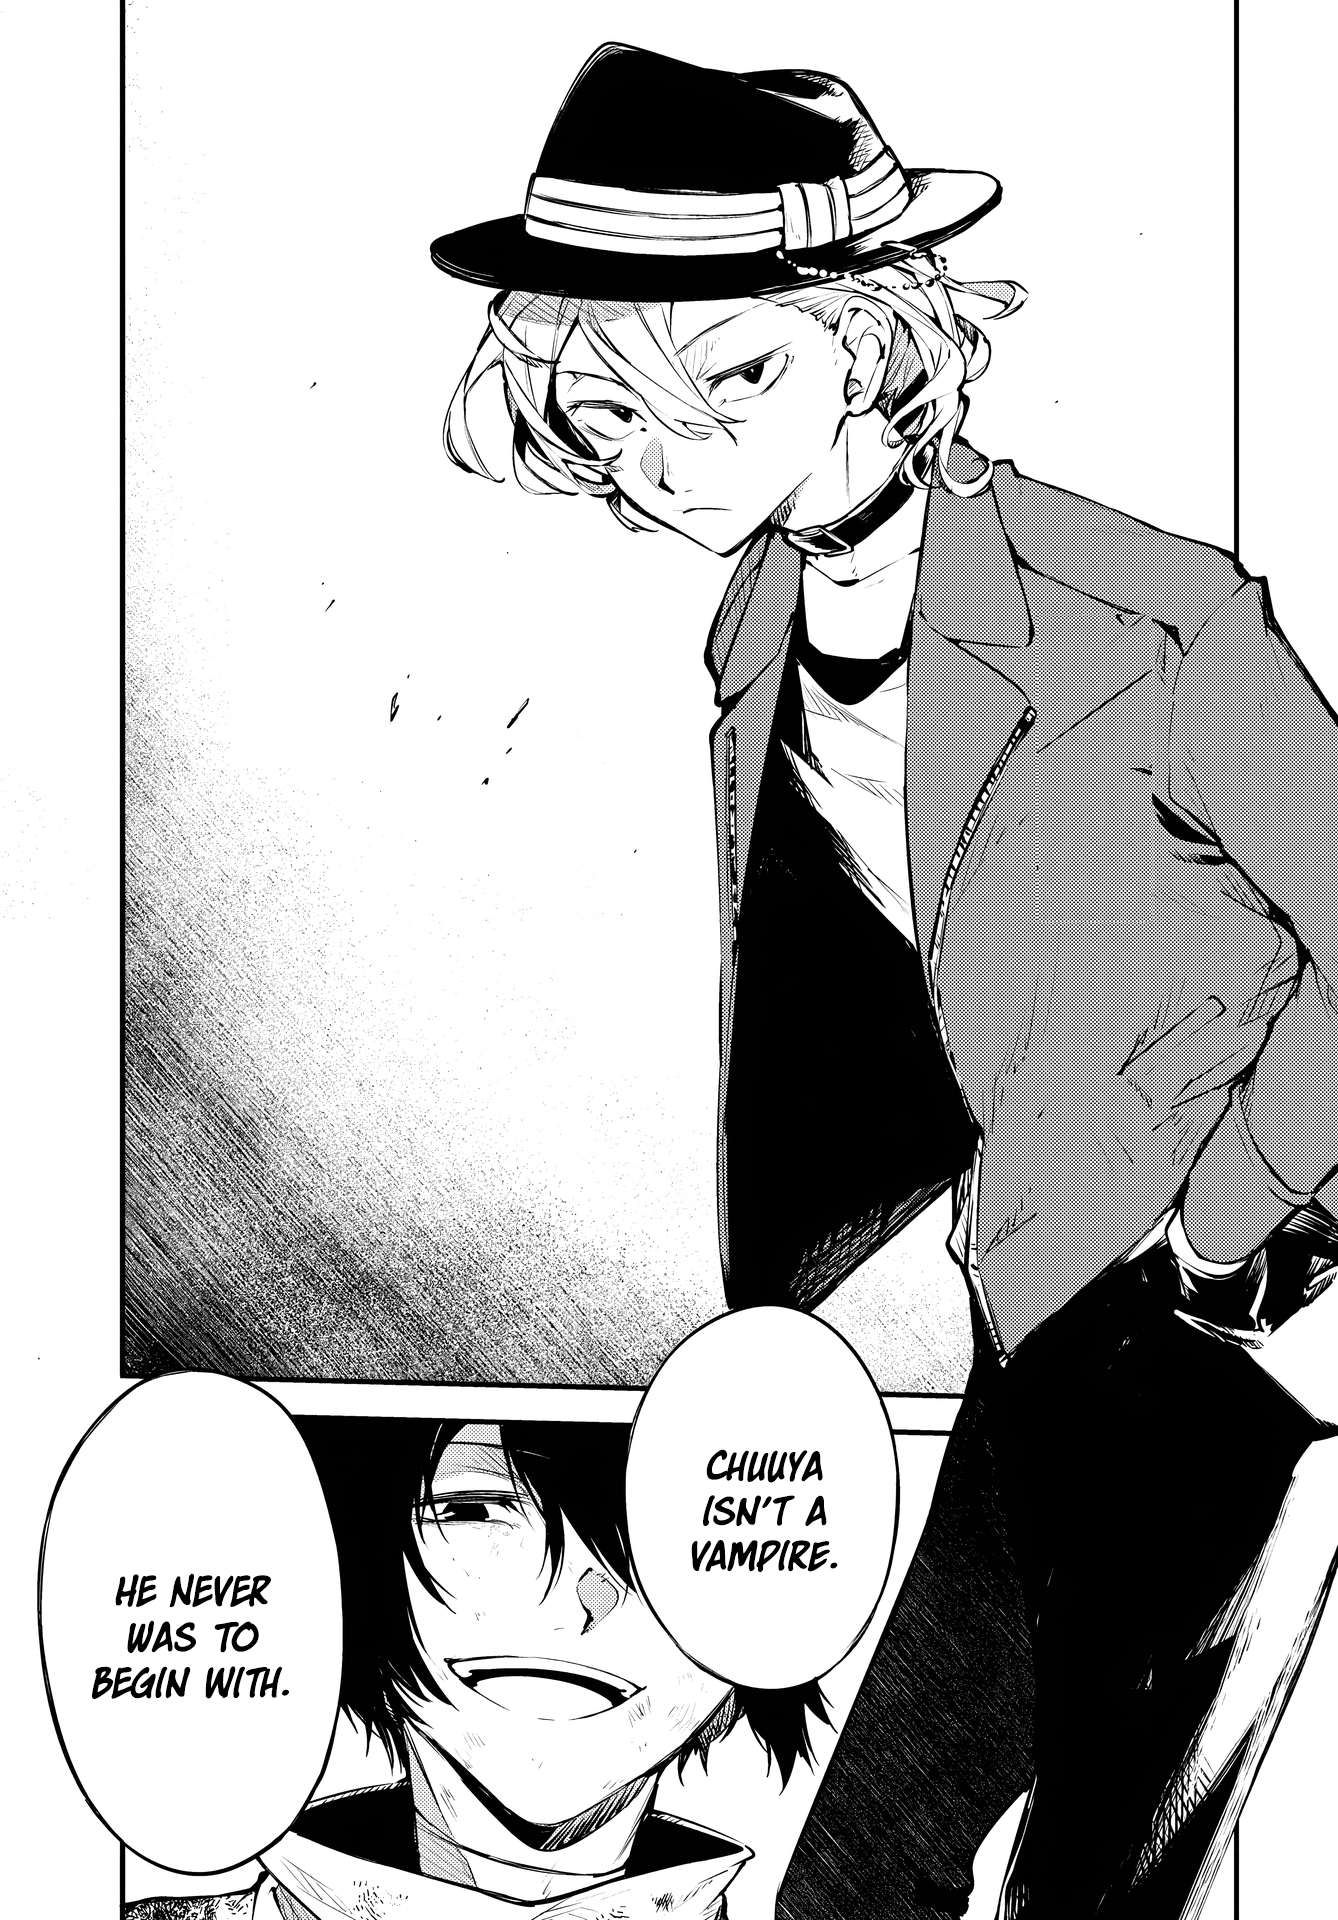 Bungo Stray Dogs chapter 111.5 page 12